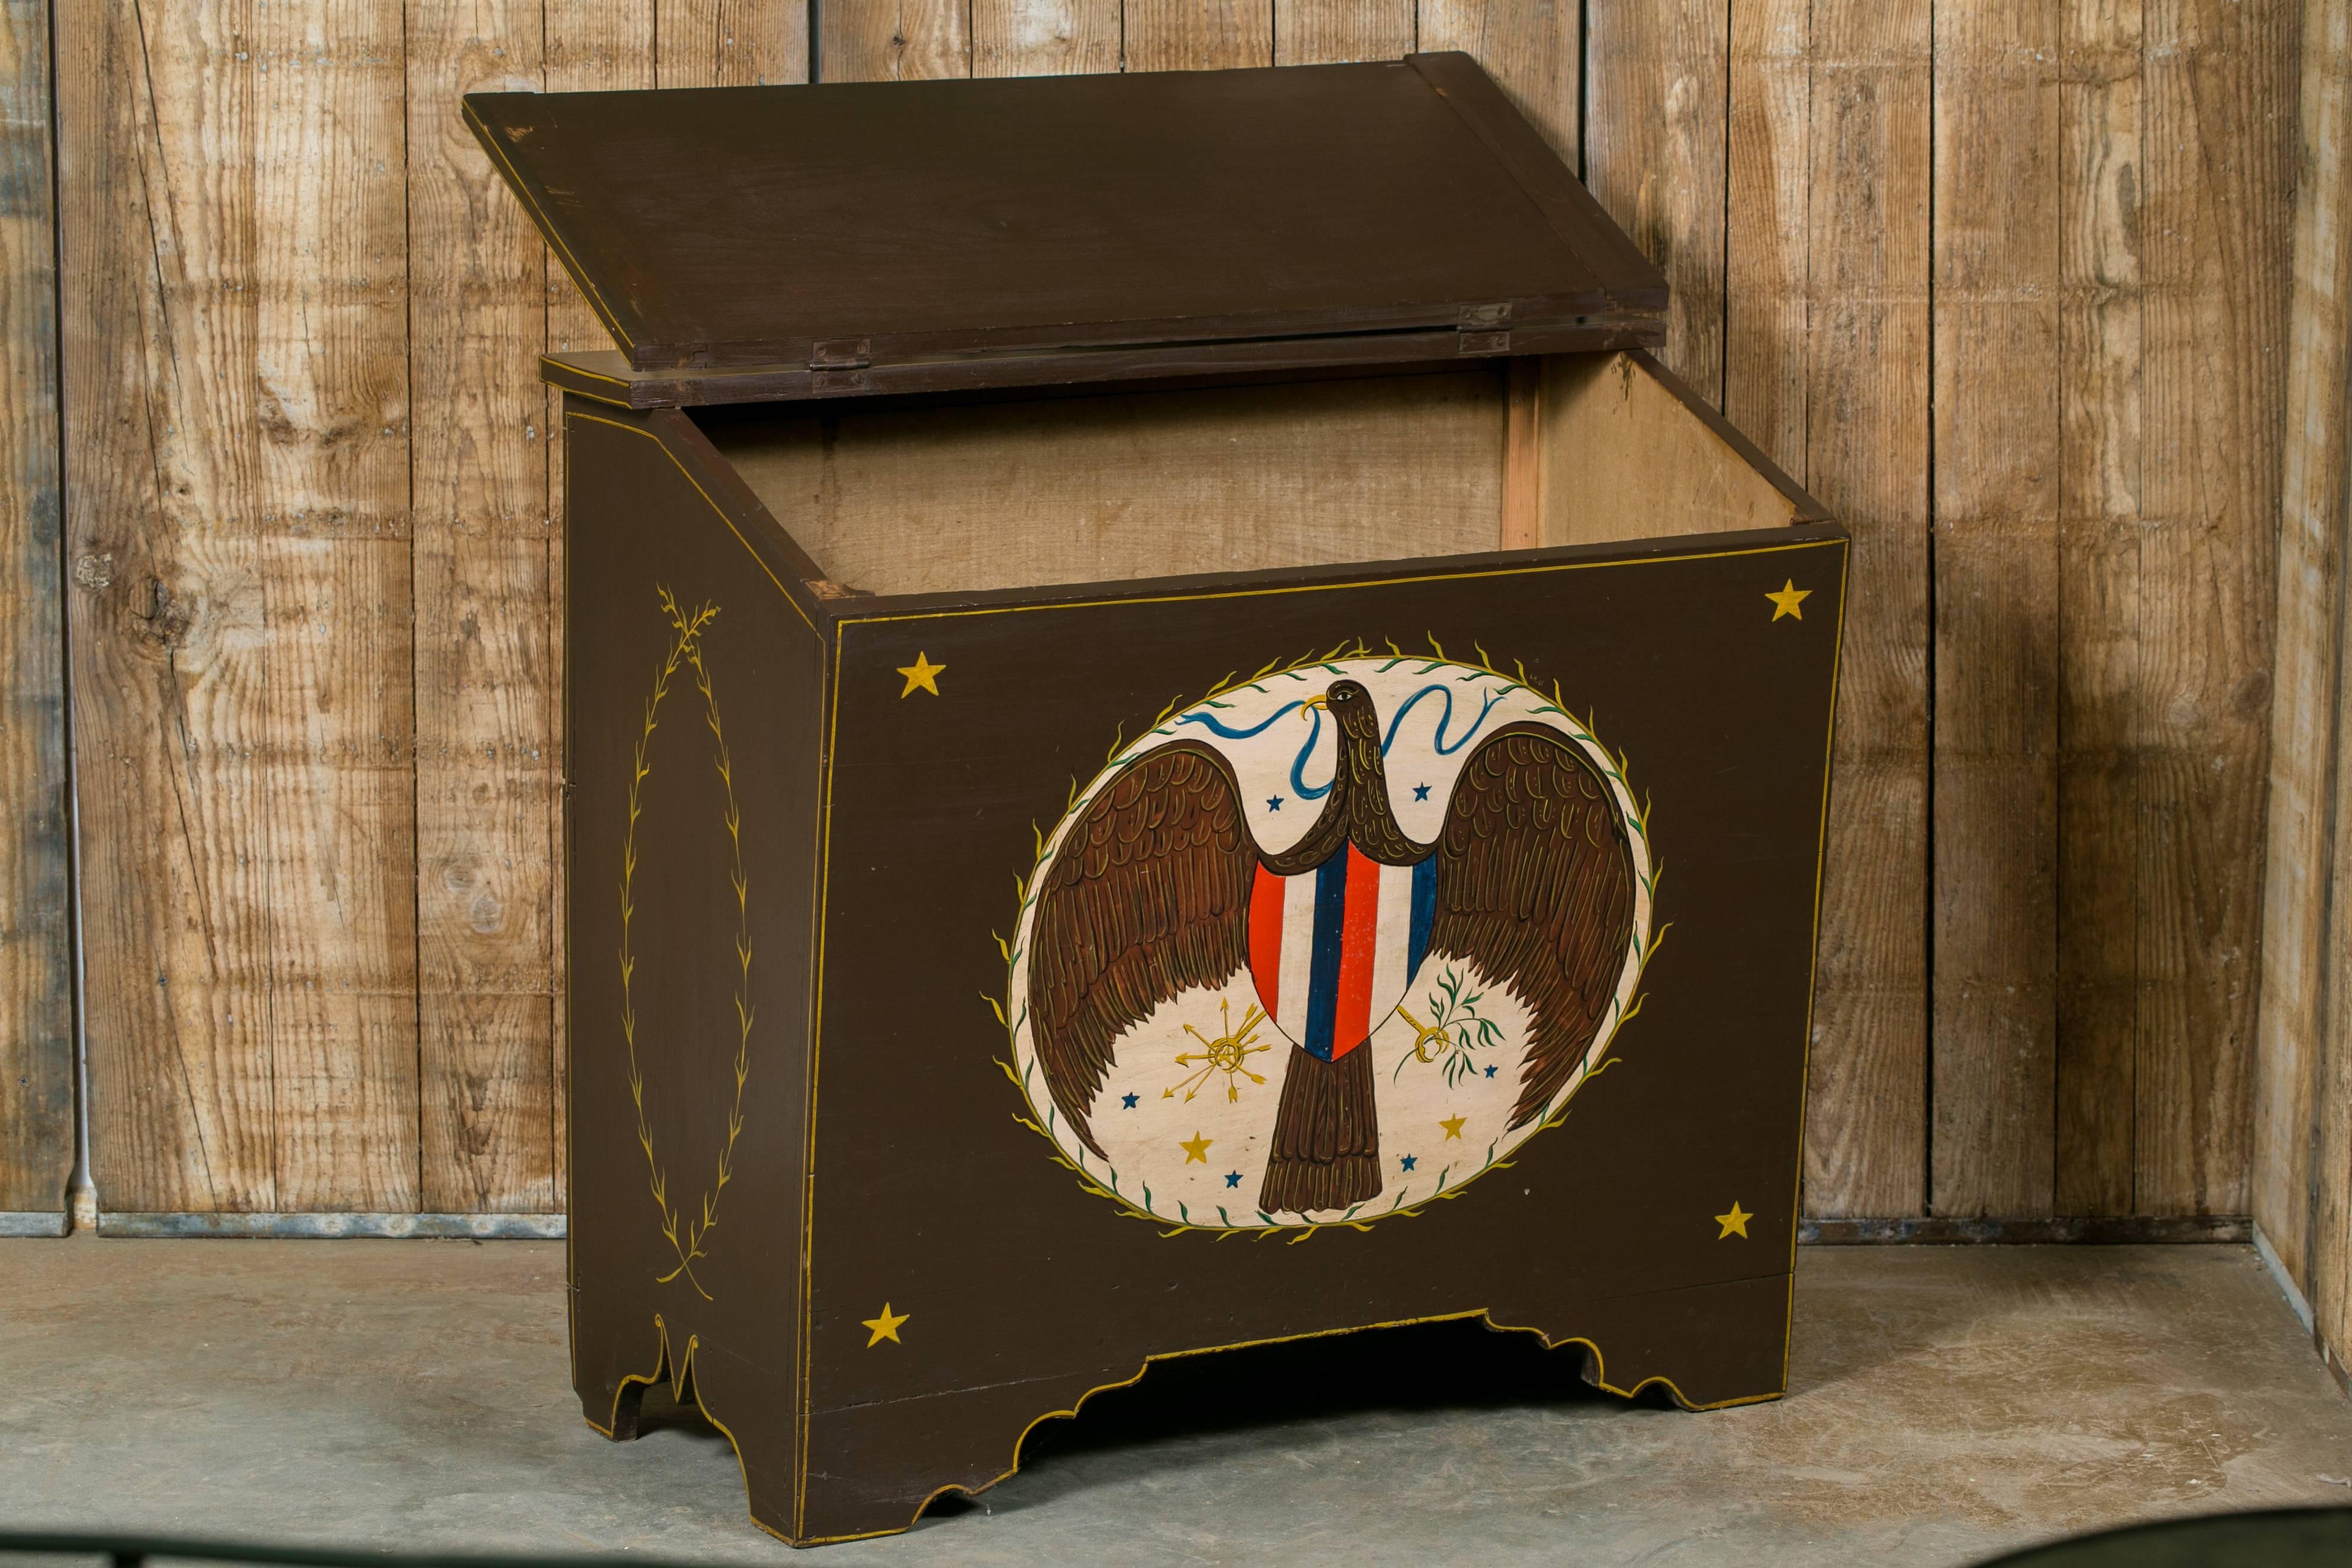 American Colonial Antique Americana Blanket Chest, circa 1900, Hand-Painted by Lew Hudnall